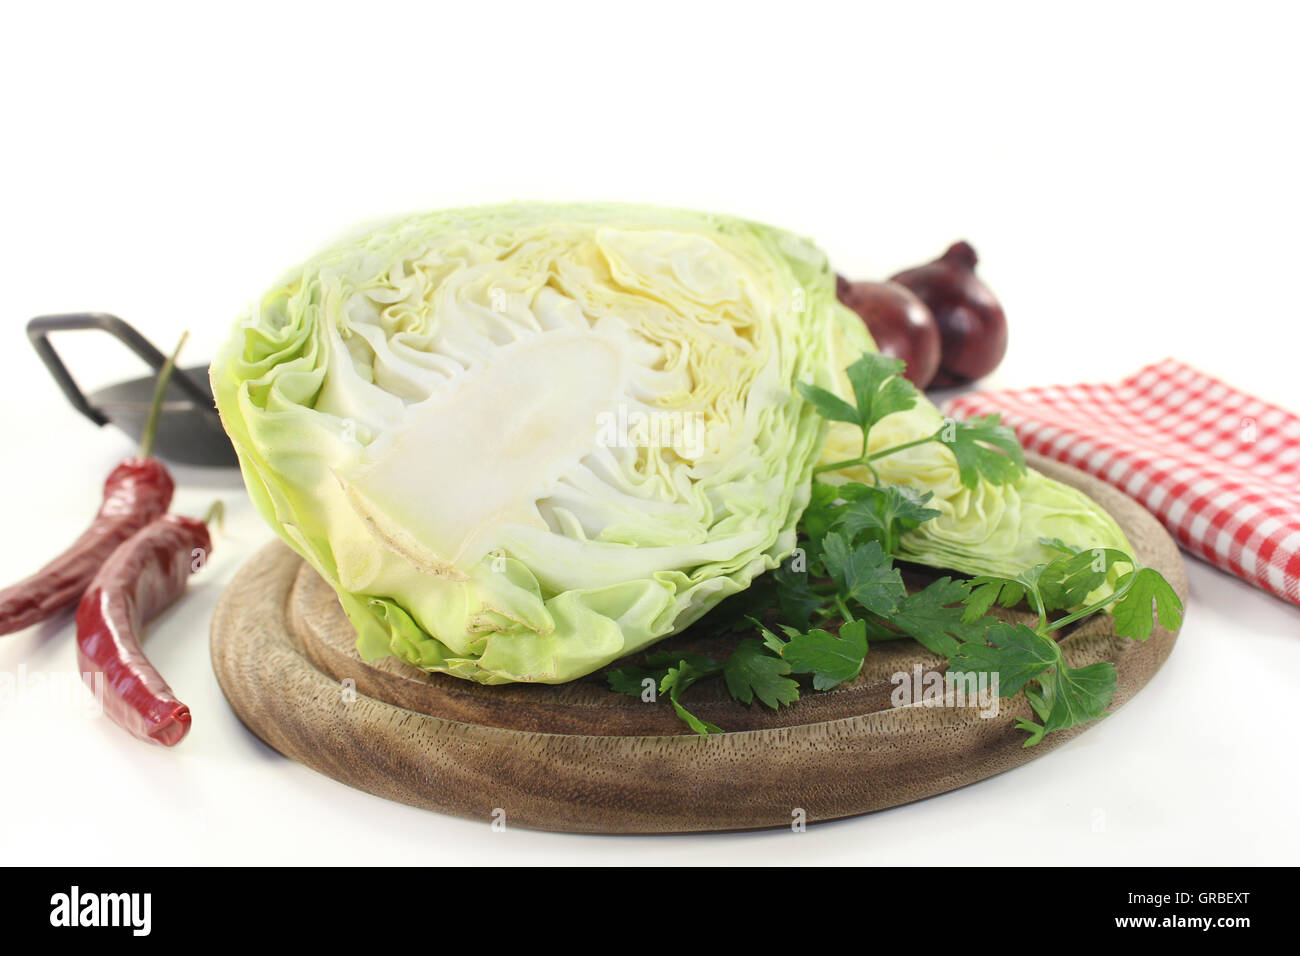 sweetheart cabbage Stock Photo